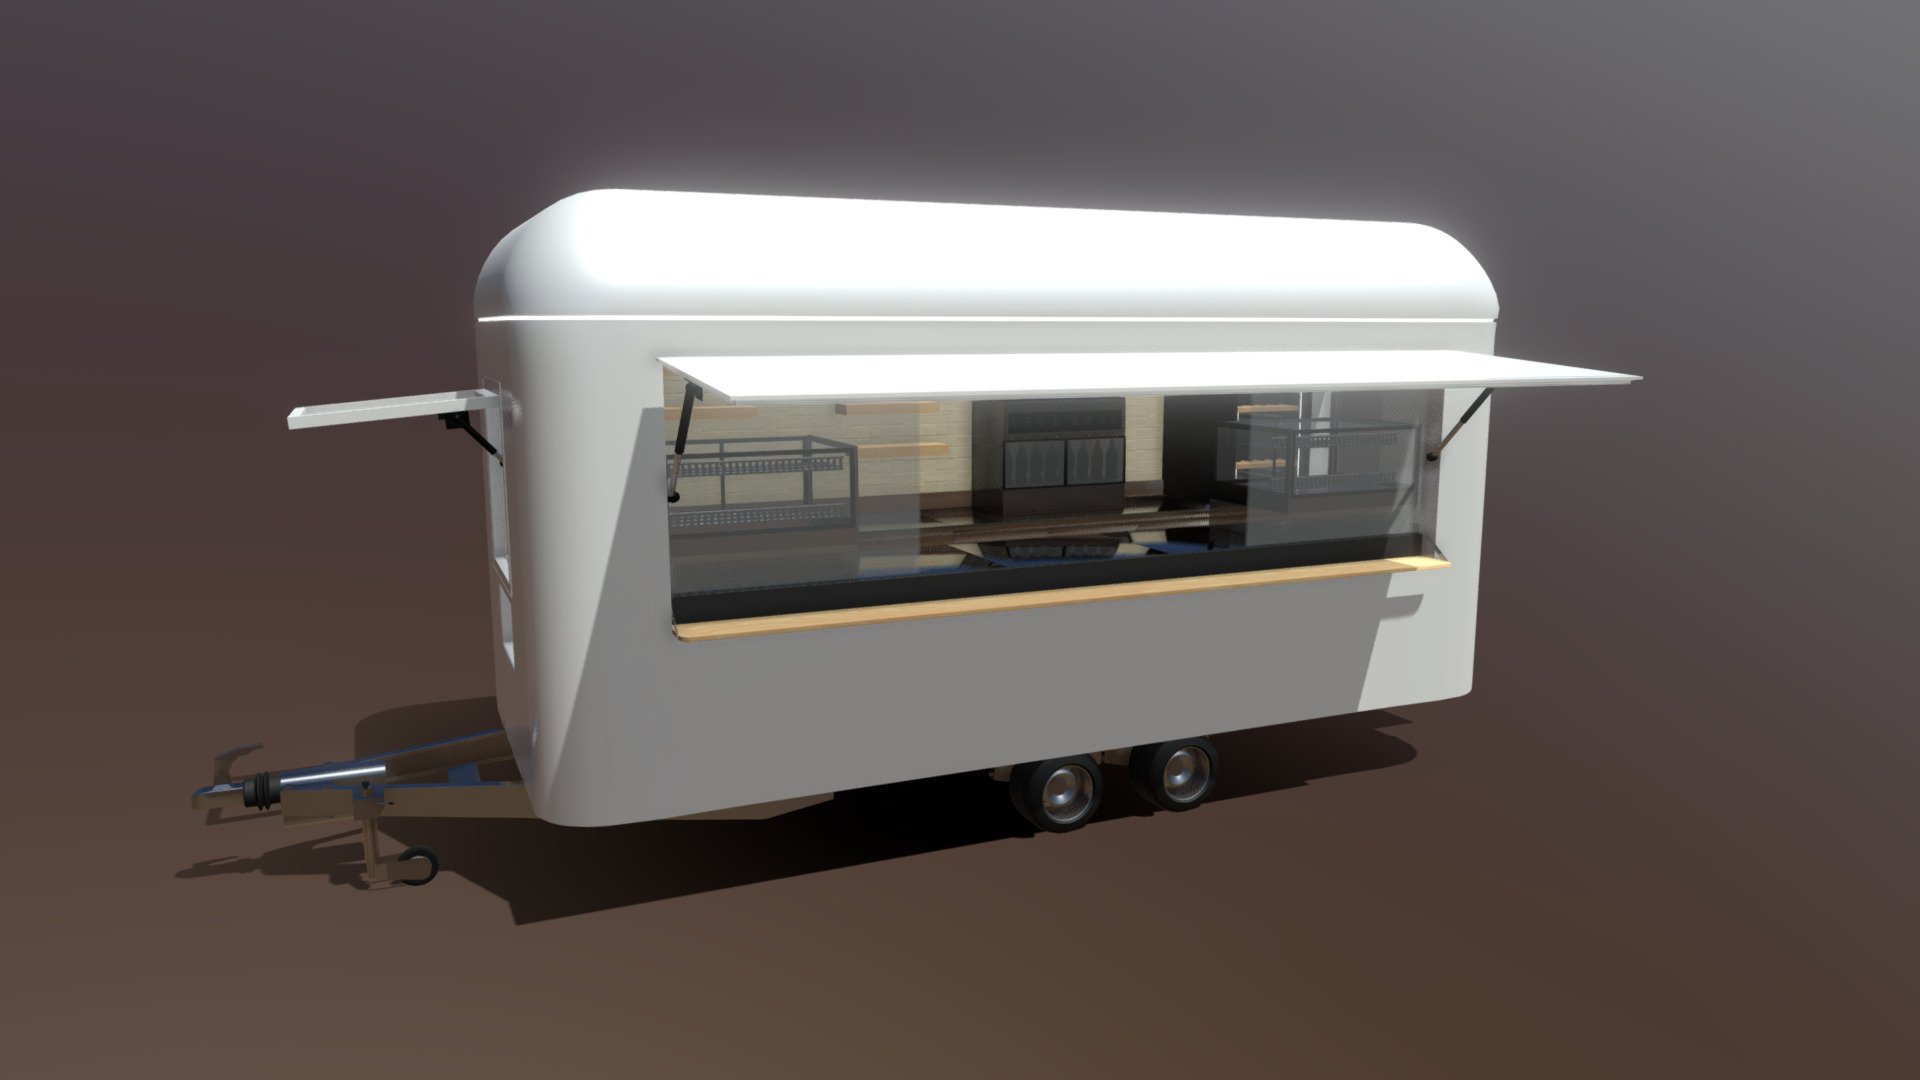 Hello every one! We are a construction company and we build food trailer such as this! We are based in Larisa, Greece.
We construct our food trailers from the beginning and we deliver to our client!
You can find more on our page and on our Youtube cahnnel!
Enjoy!
Page: https://www.kantines.com/en/
Youtube Channel: https://www.youtube.com/channel/UC9tjeUF84Me9ylLlnX4MHTw - Food trailer Large category (4.5m x 2.25m) - 3D model by Kantines.com 3d model